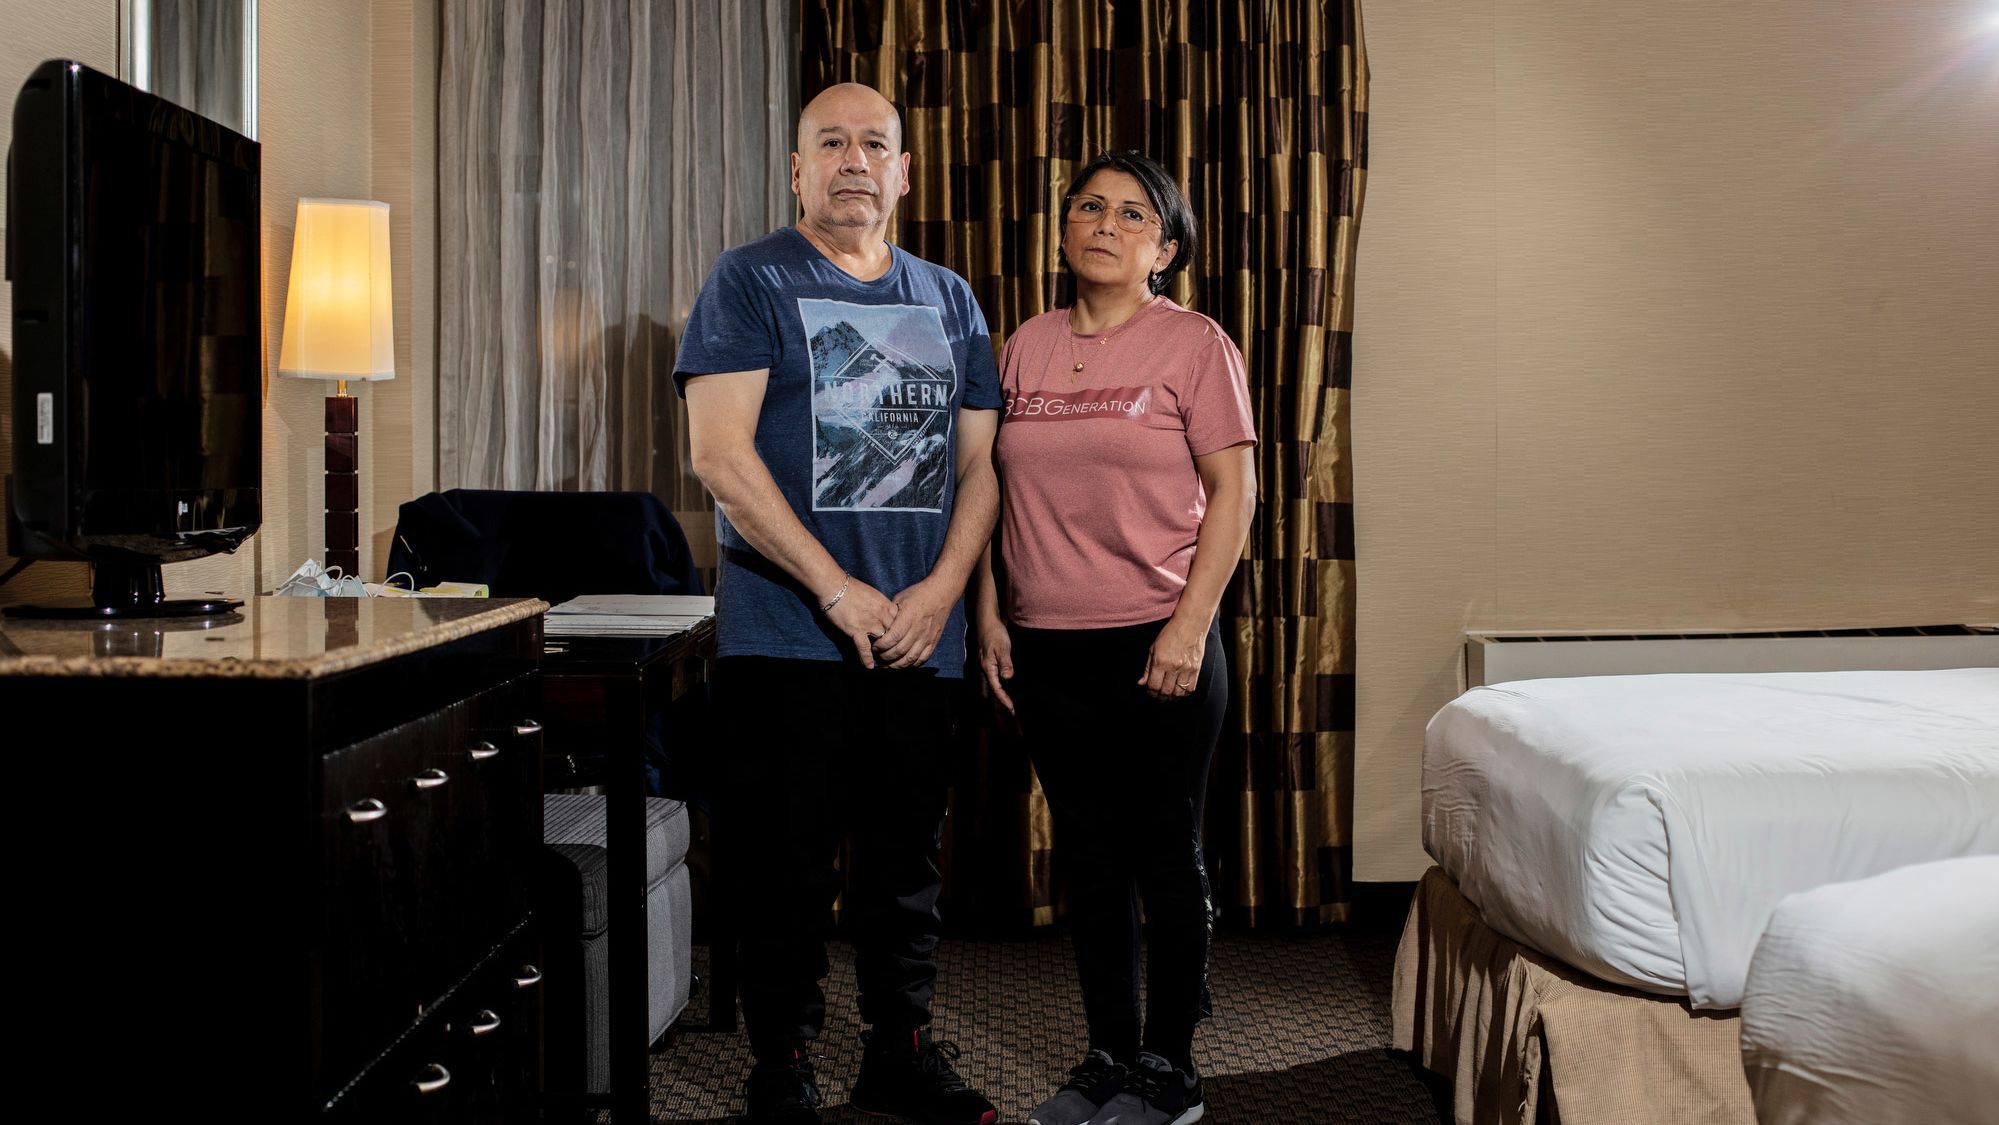 Mario Gamino, left, and Bibiane L. Chamorro are among the people displaced by Hurricane Ida who are now staying at the Radisson Hotel by the JFK Airport in Queens.